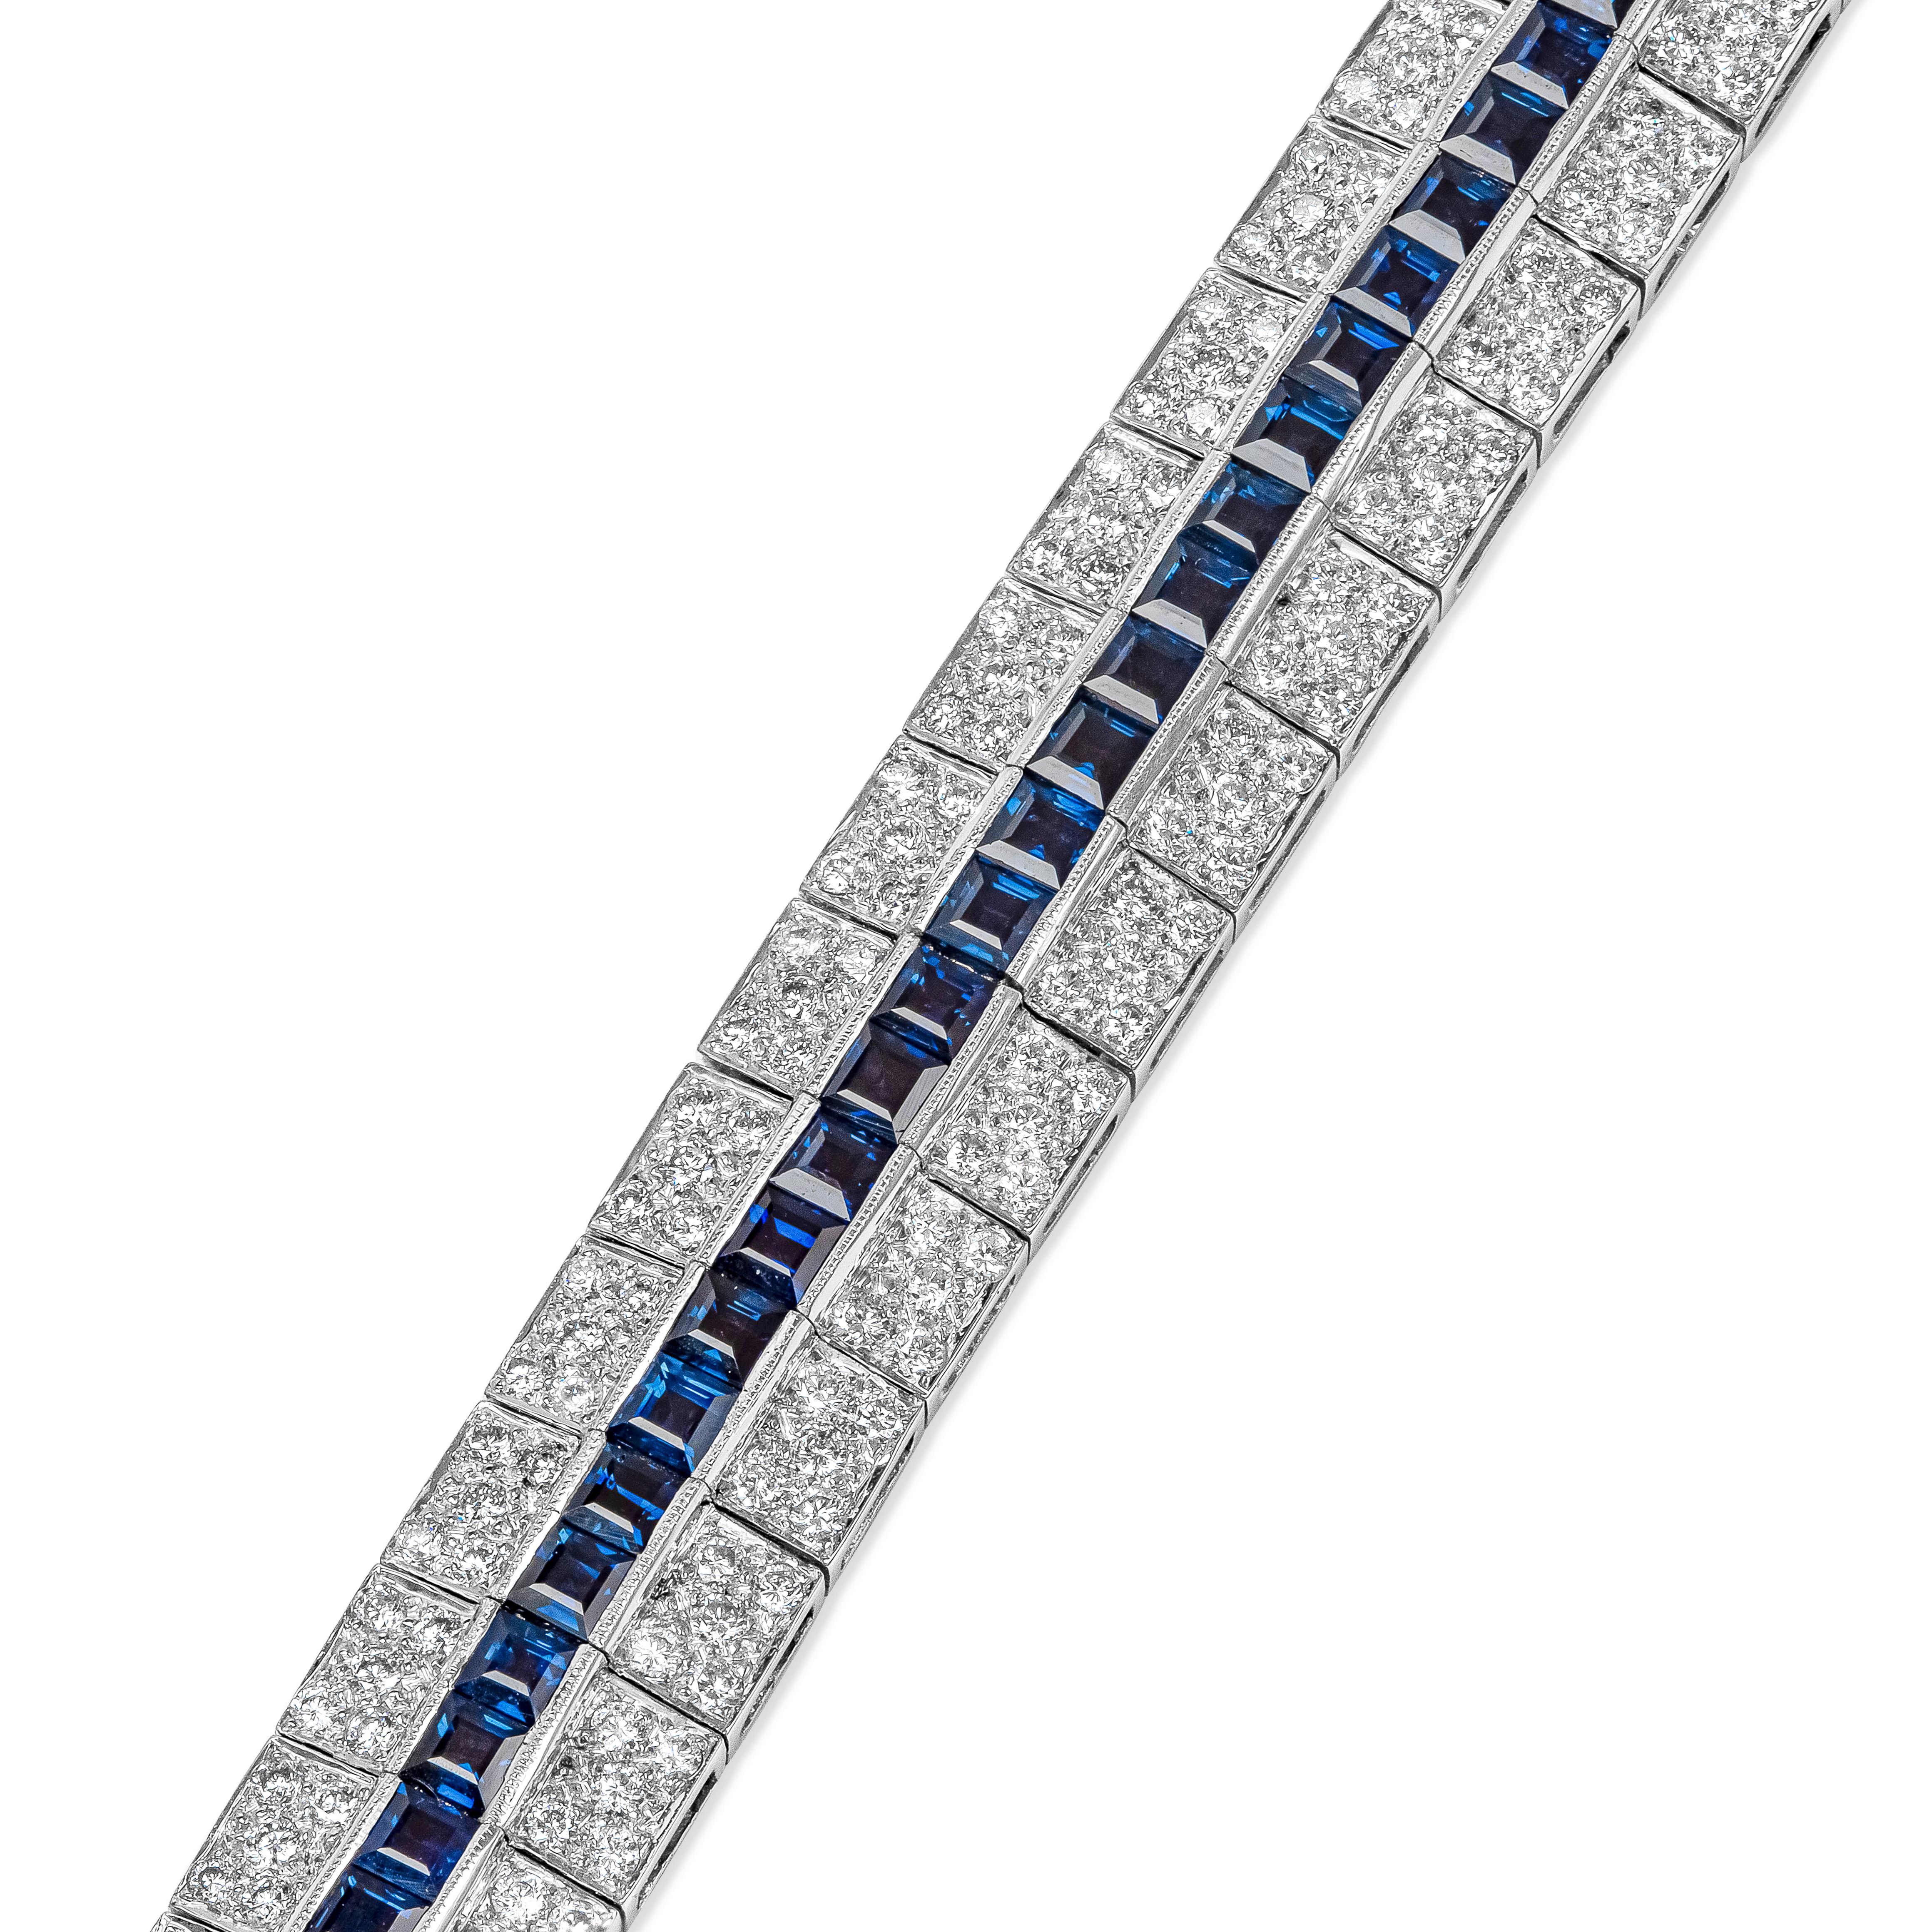 An beautiful art deco bracelet showcasing a line of square cut blue sapphires weighing 9.20 carats total. In-between the sapphires are round diamonds weighing 4.02 carats total, G color and SI in clarity. Finely made in 18k white gold and 7 inches